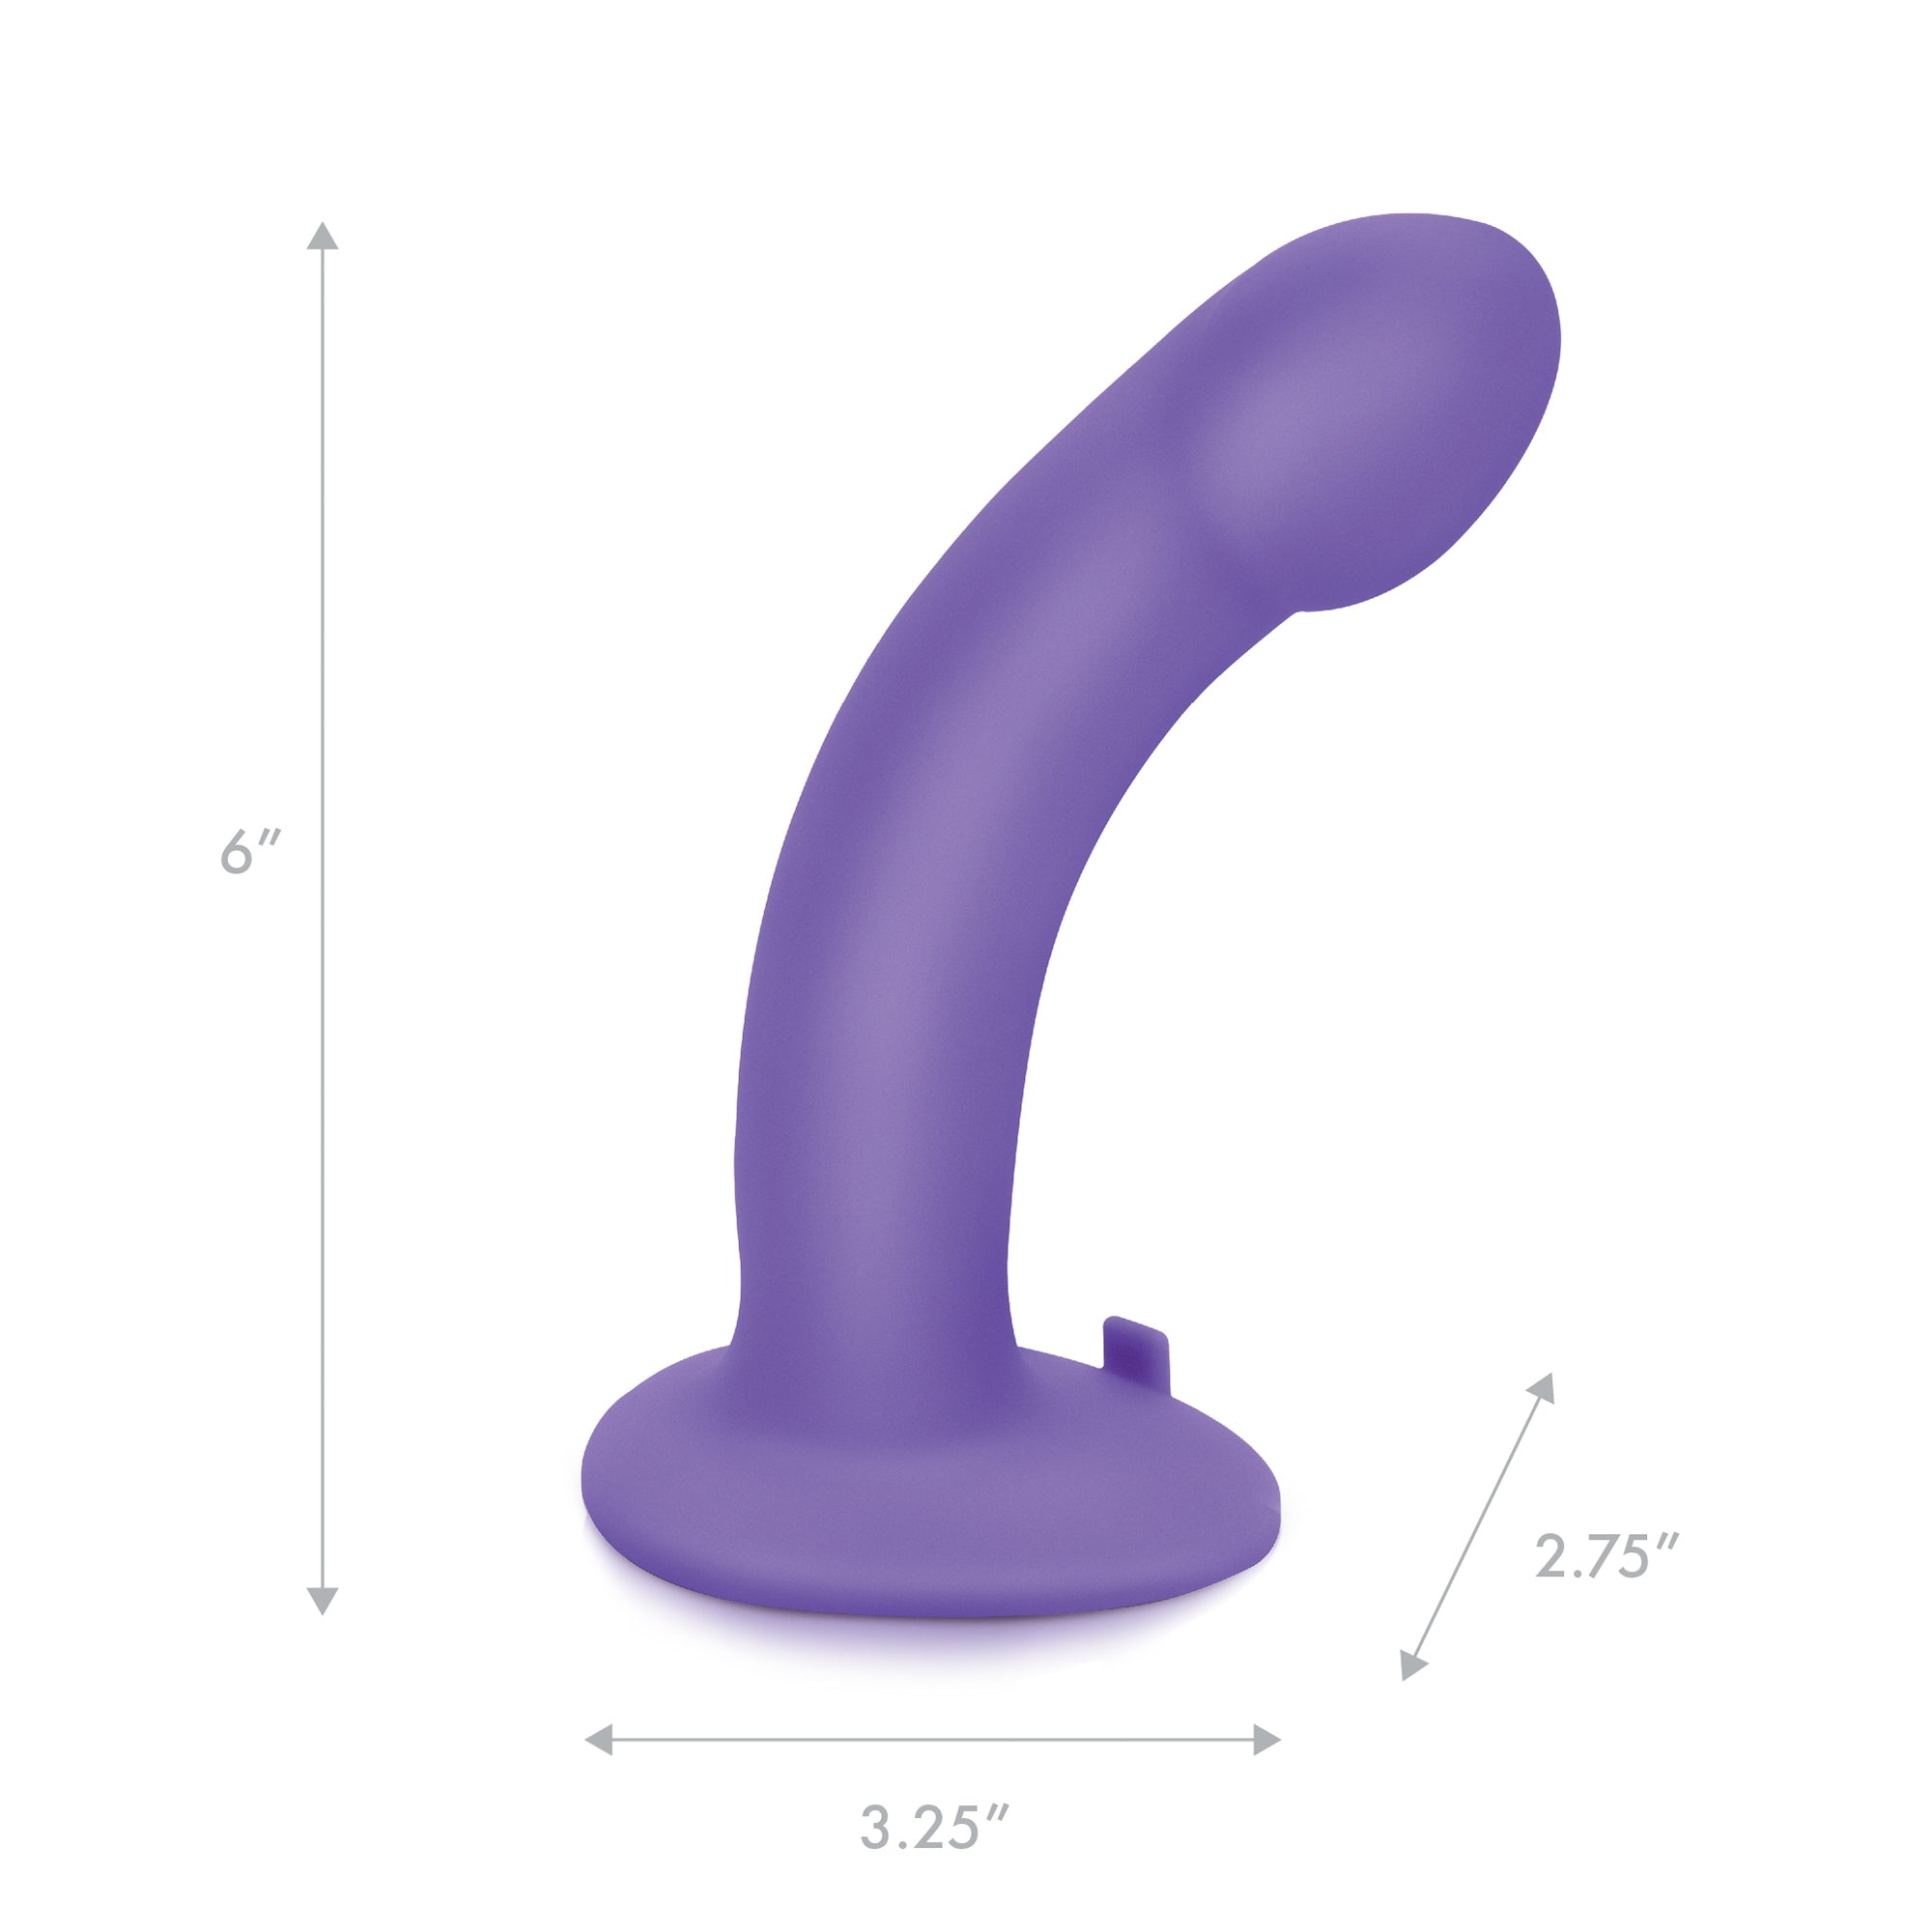 6" Curved Realistic Silicone Peg With Harness Included